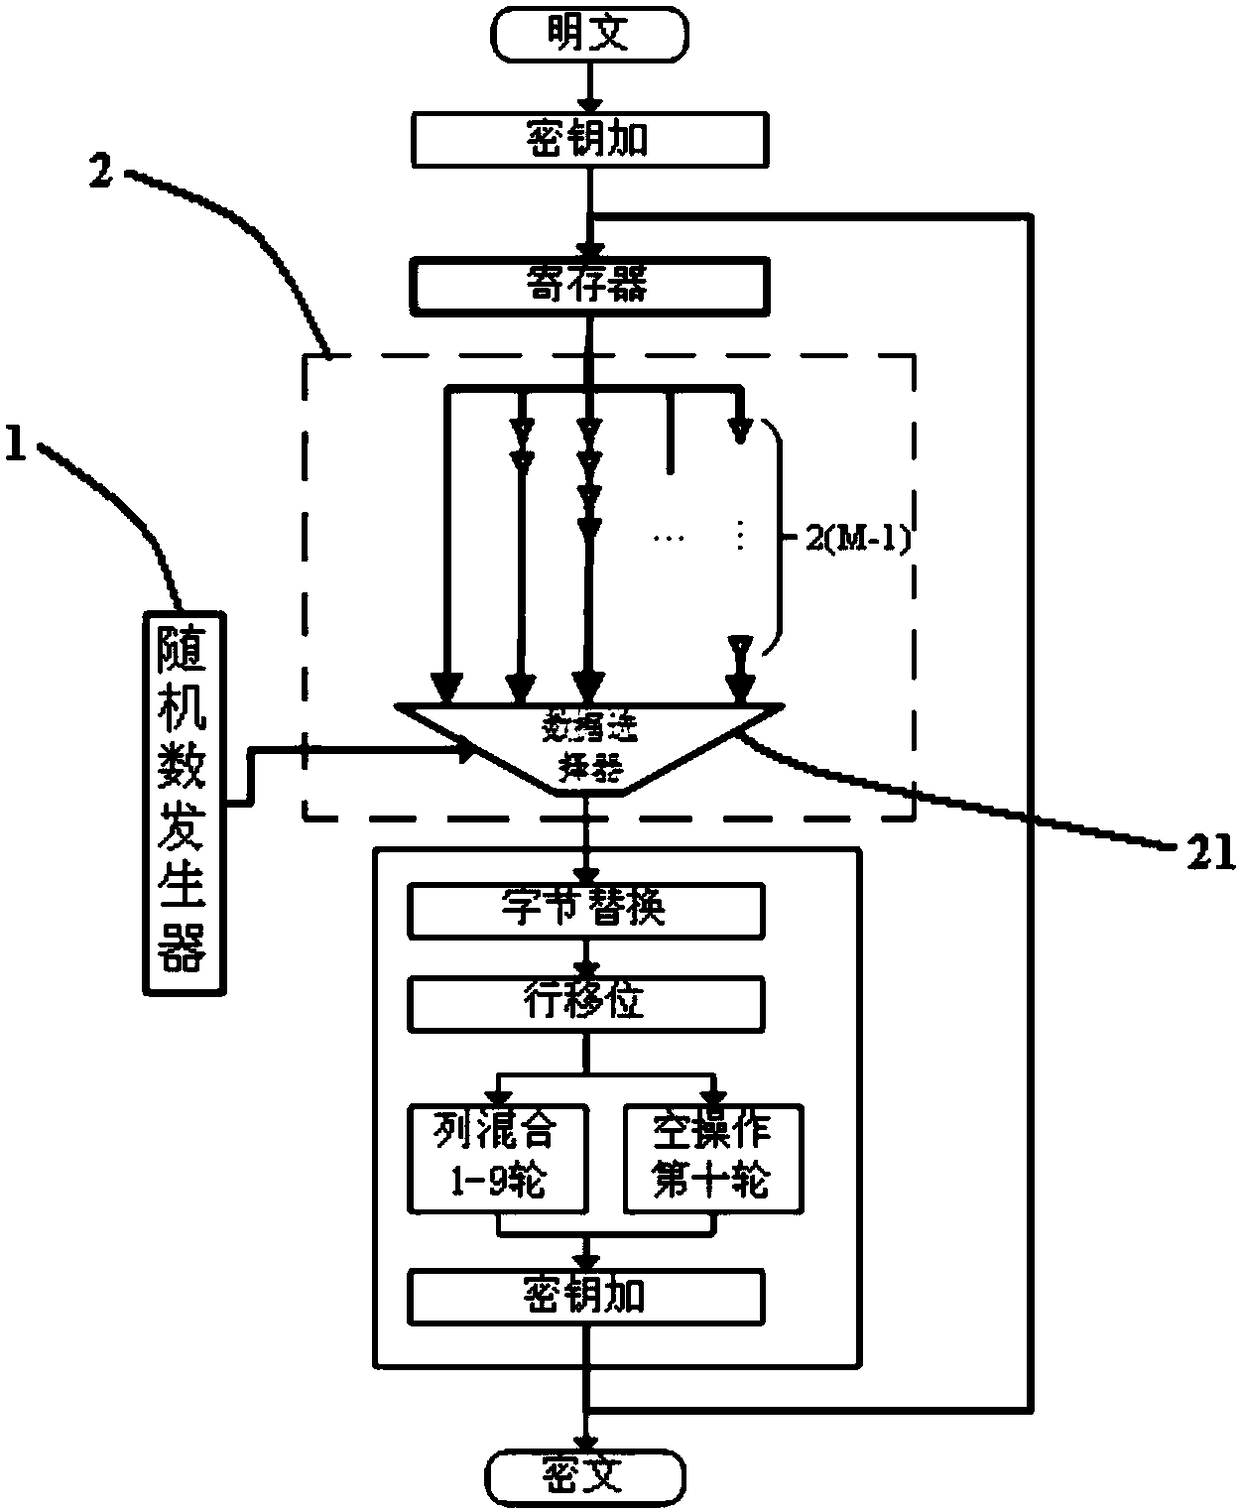 An AES Algorithm-Oriented Anti-Power Attack Method Based on Random Delay